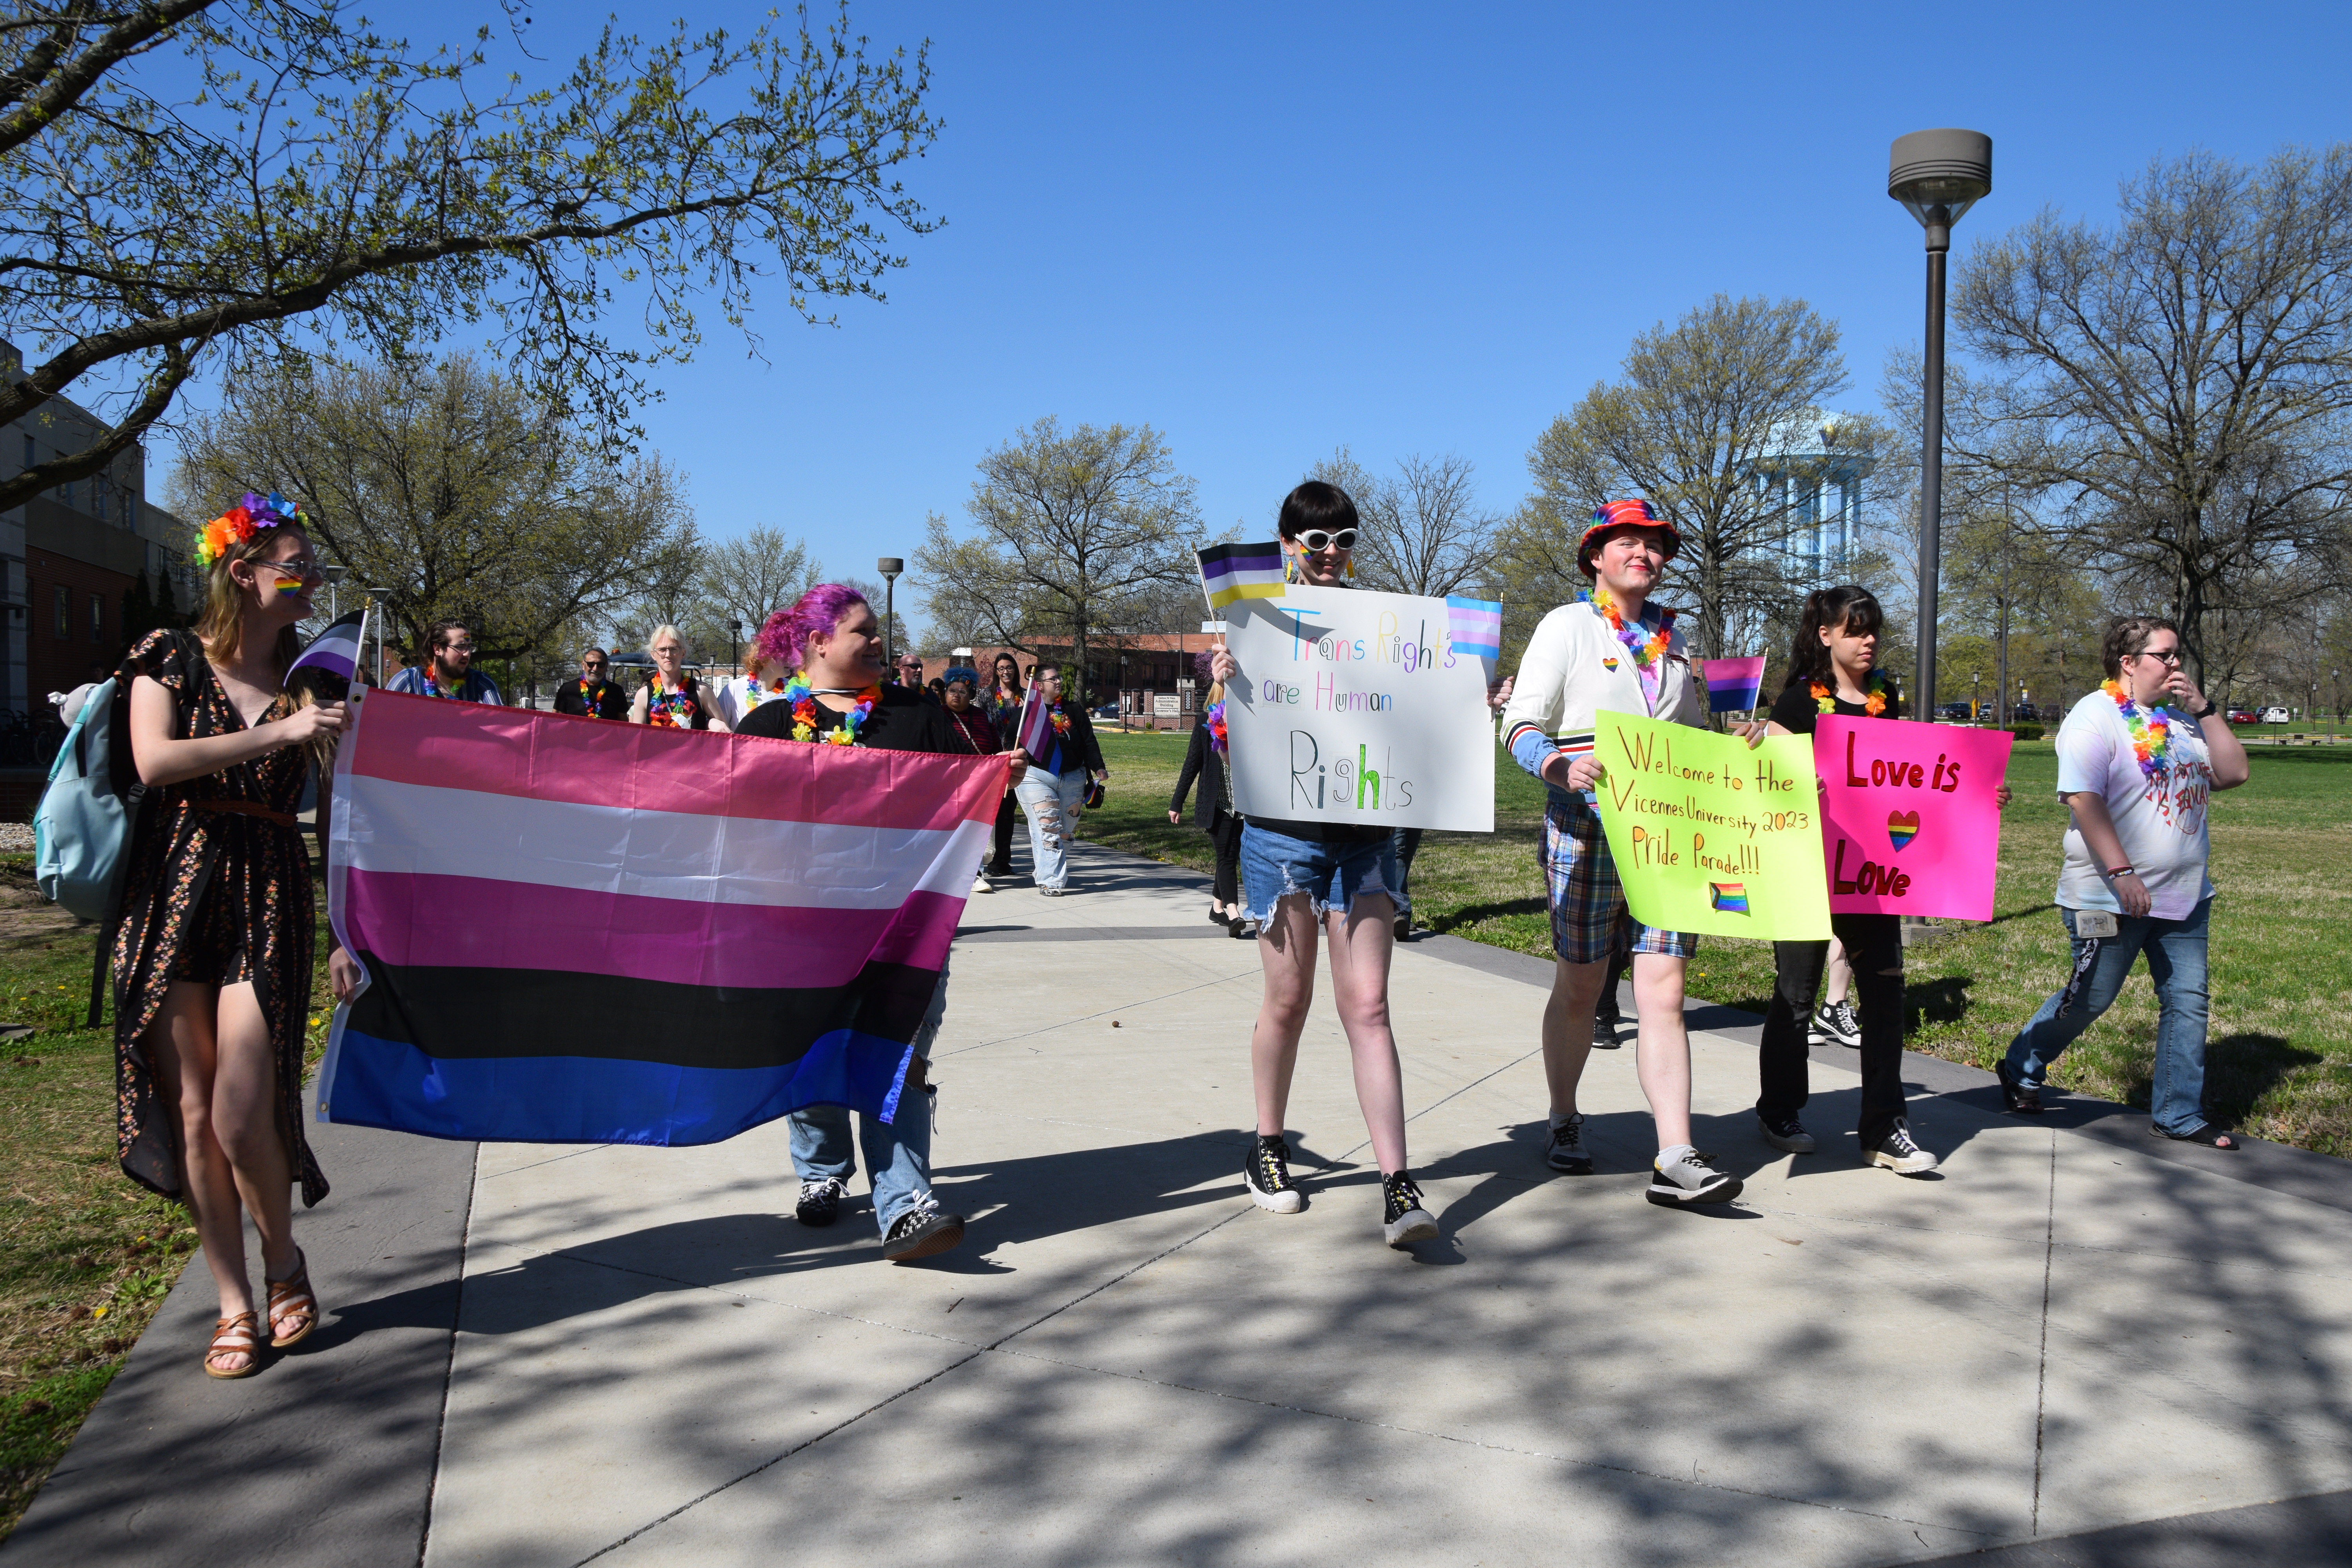 VU students carrying supportive signs and colorful flags